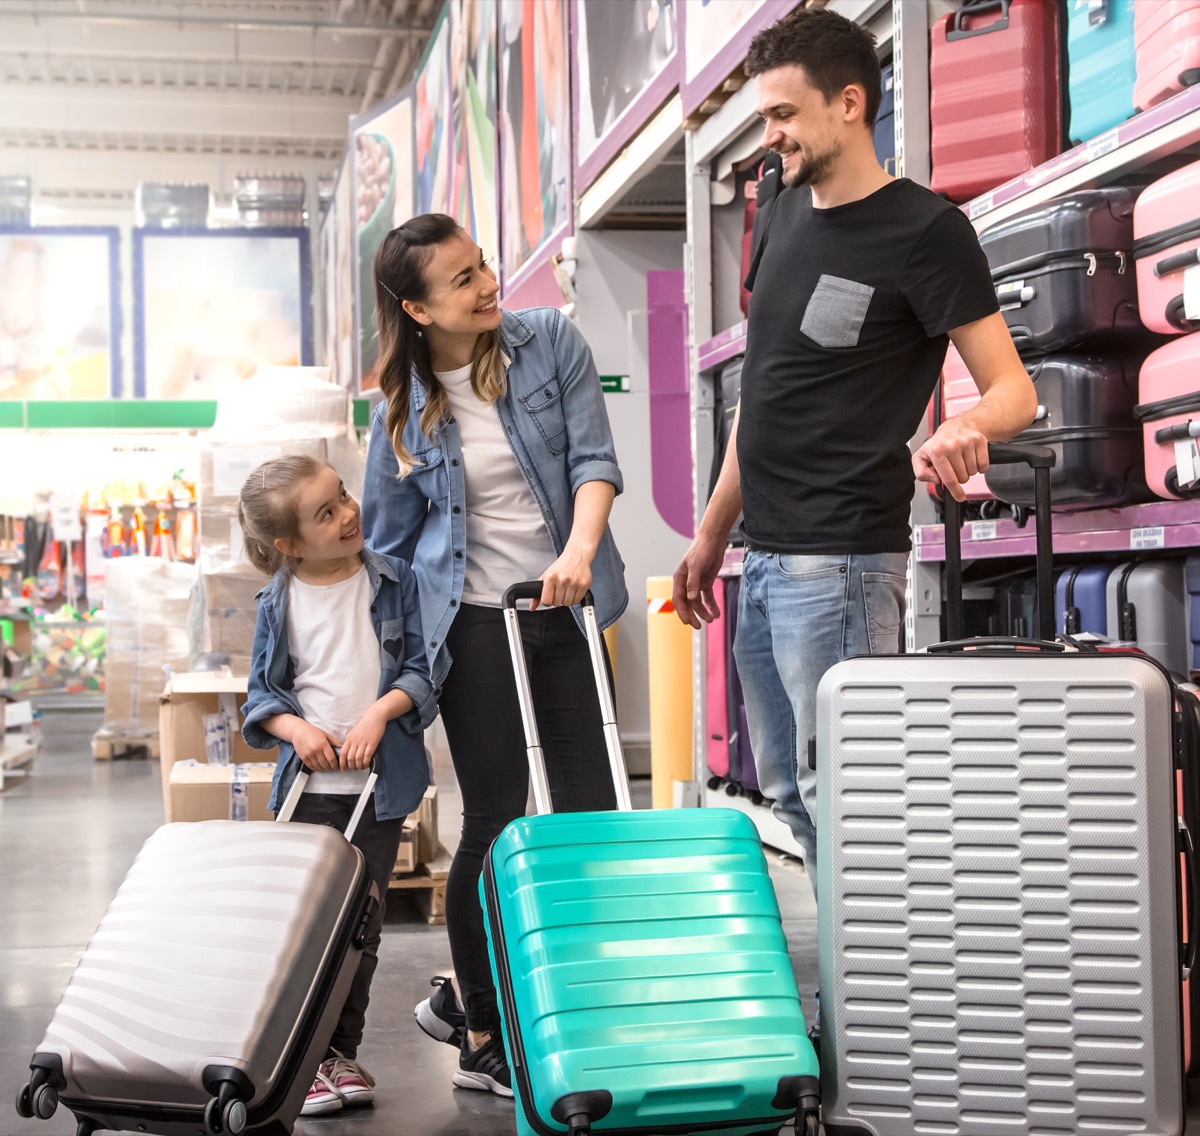 Family buying luggage in a store